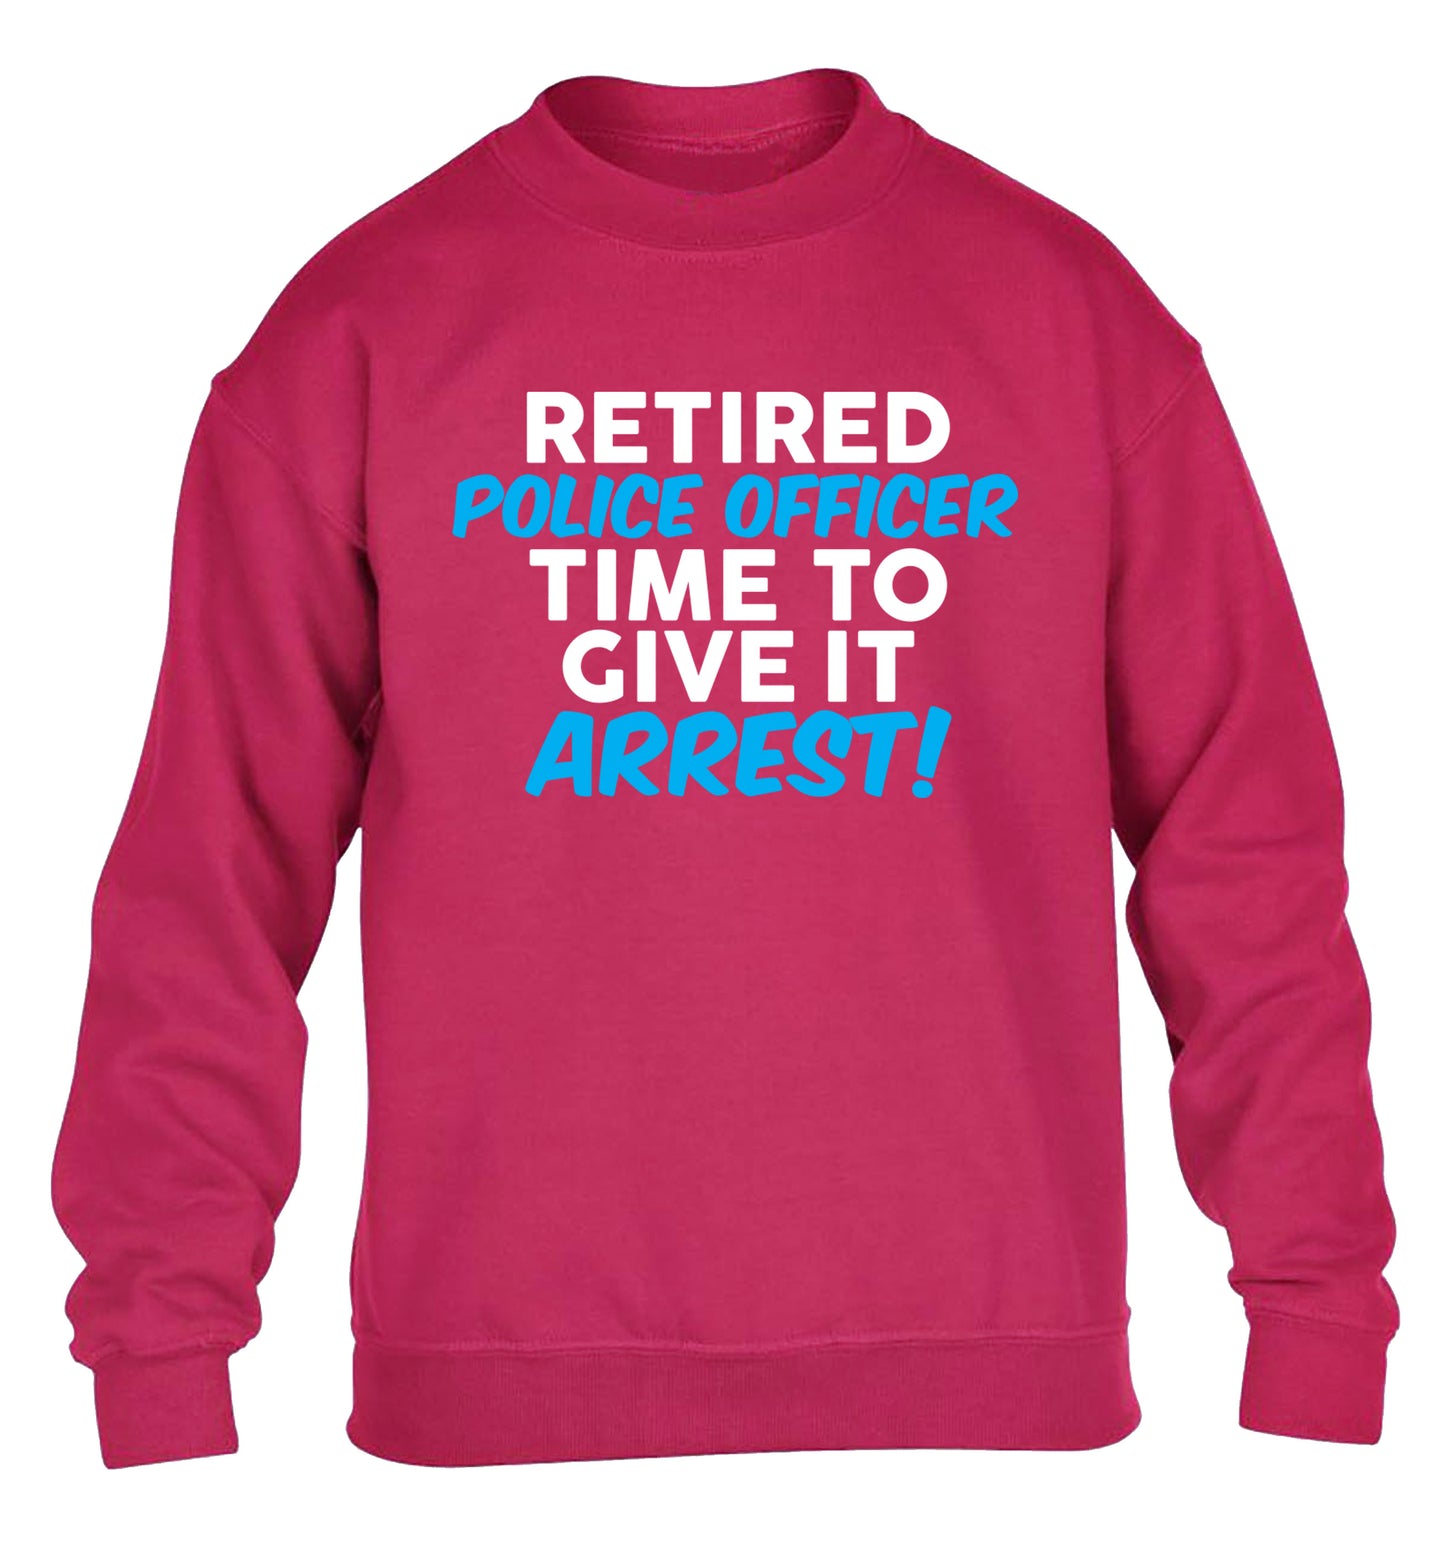 Retired police officer time to give it arrest children's pink sweater 12-13 Years